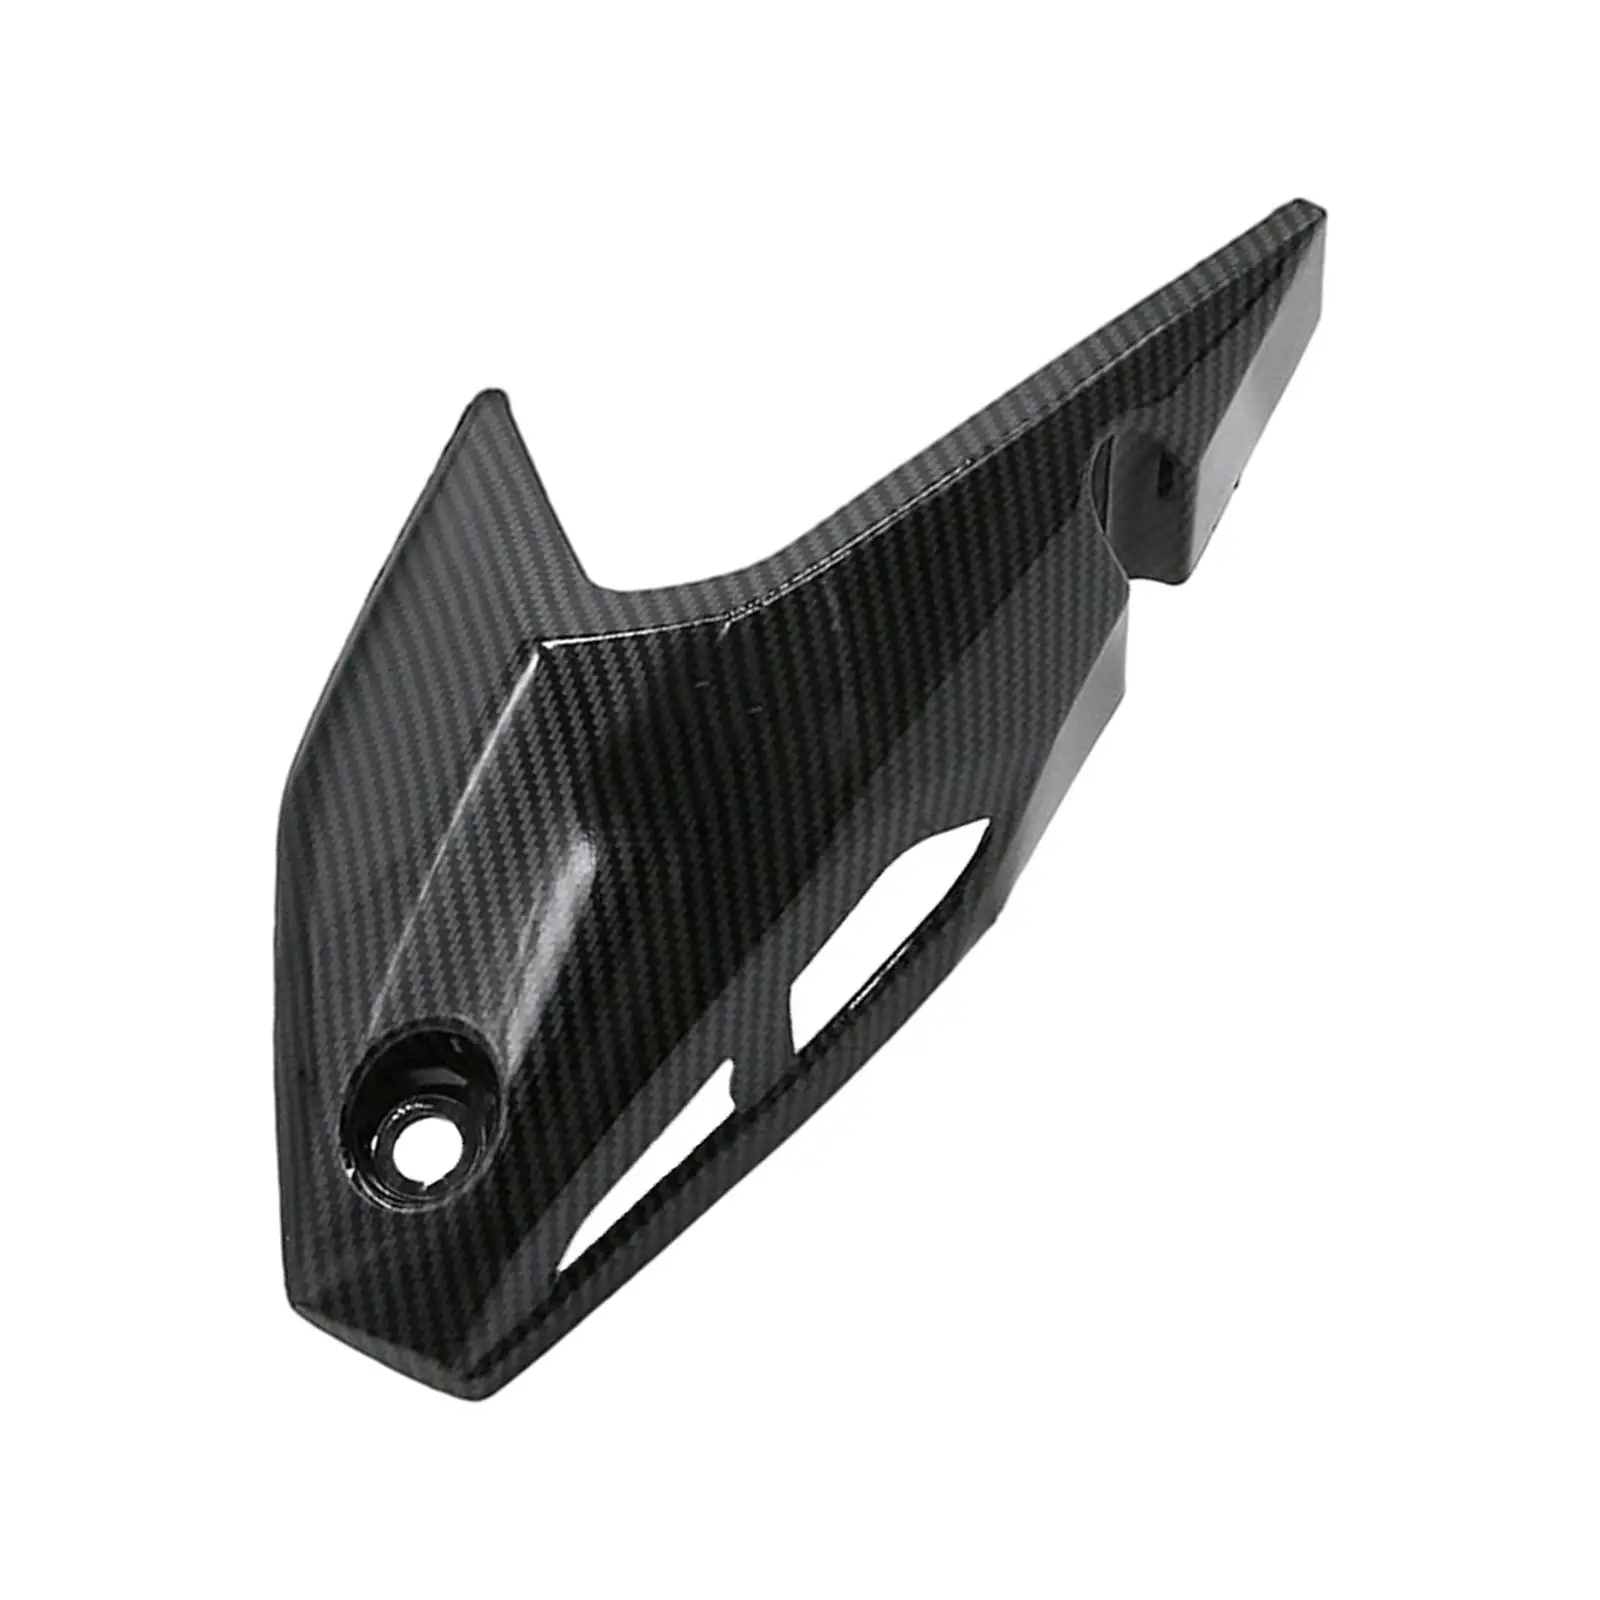 Motorcycle Exhaust Pipe Cover Anti-Scalding Carbon Fiber Exhaust Heat Shield for Honda Adv150 Parts Replacement Accessories